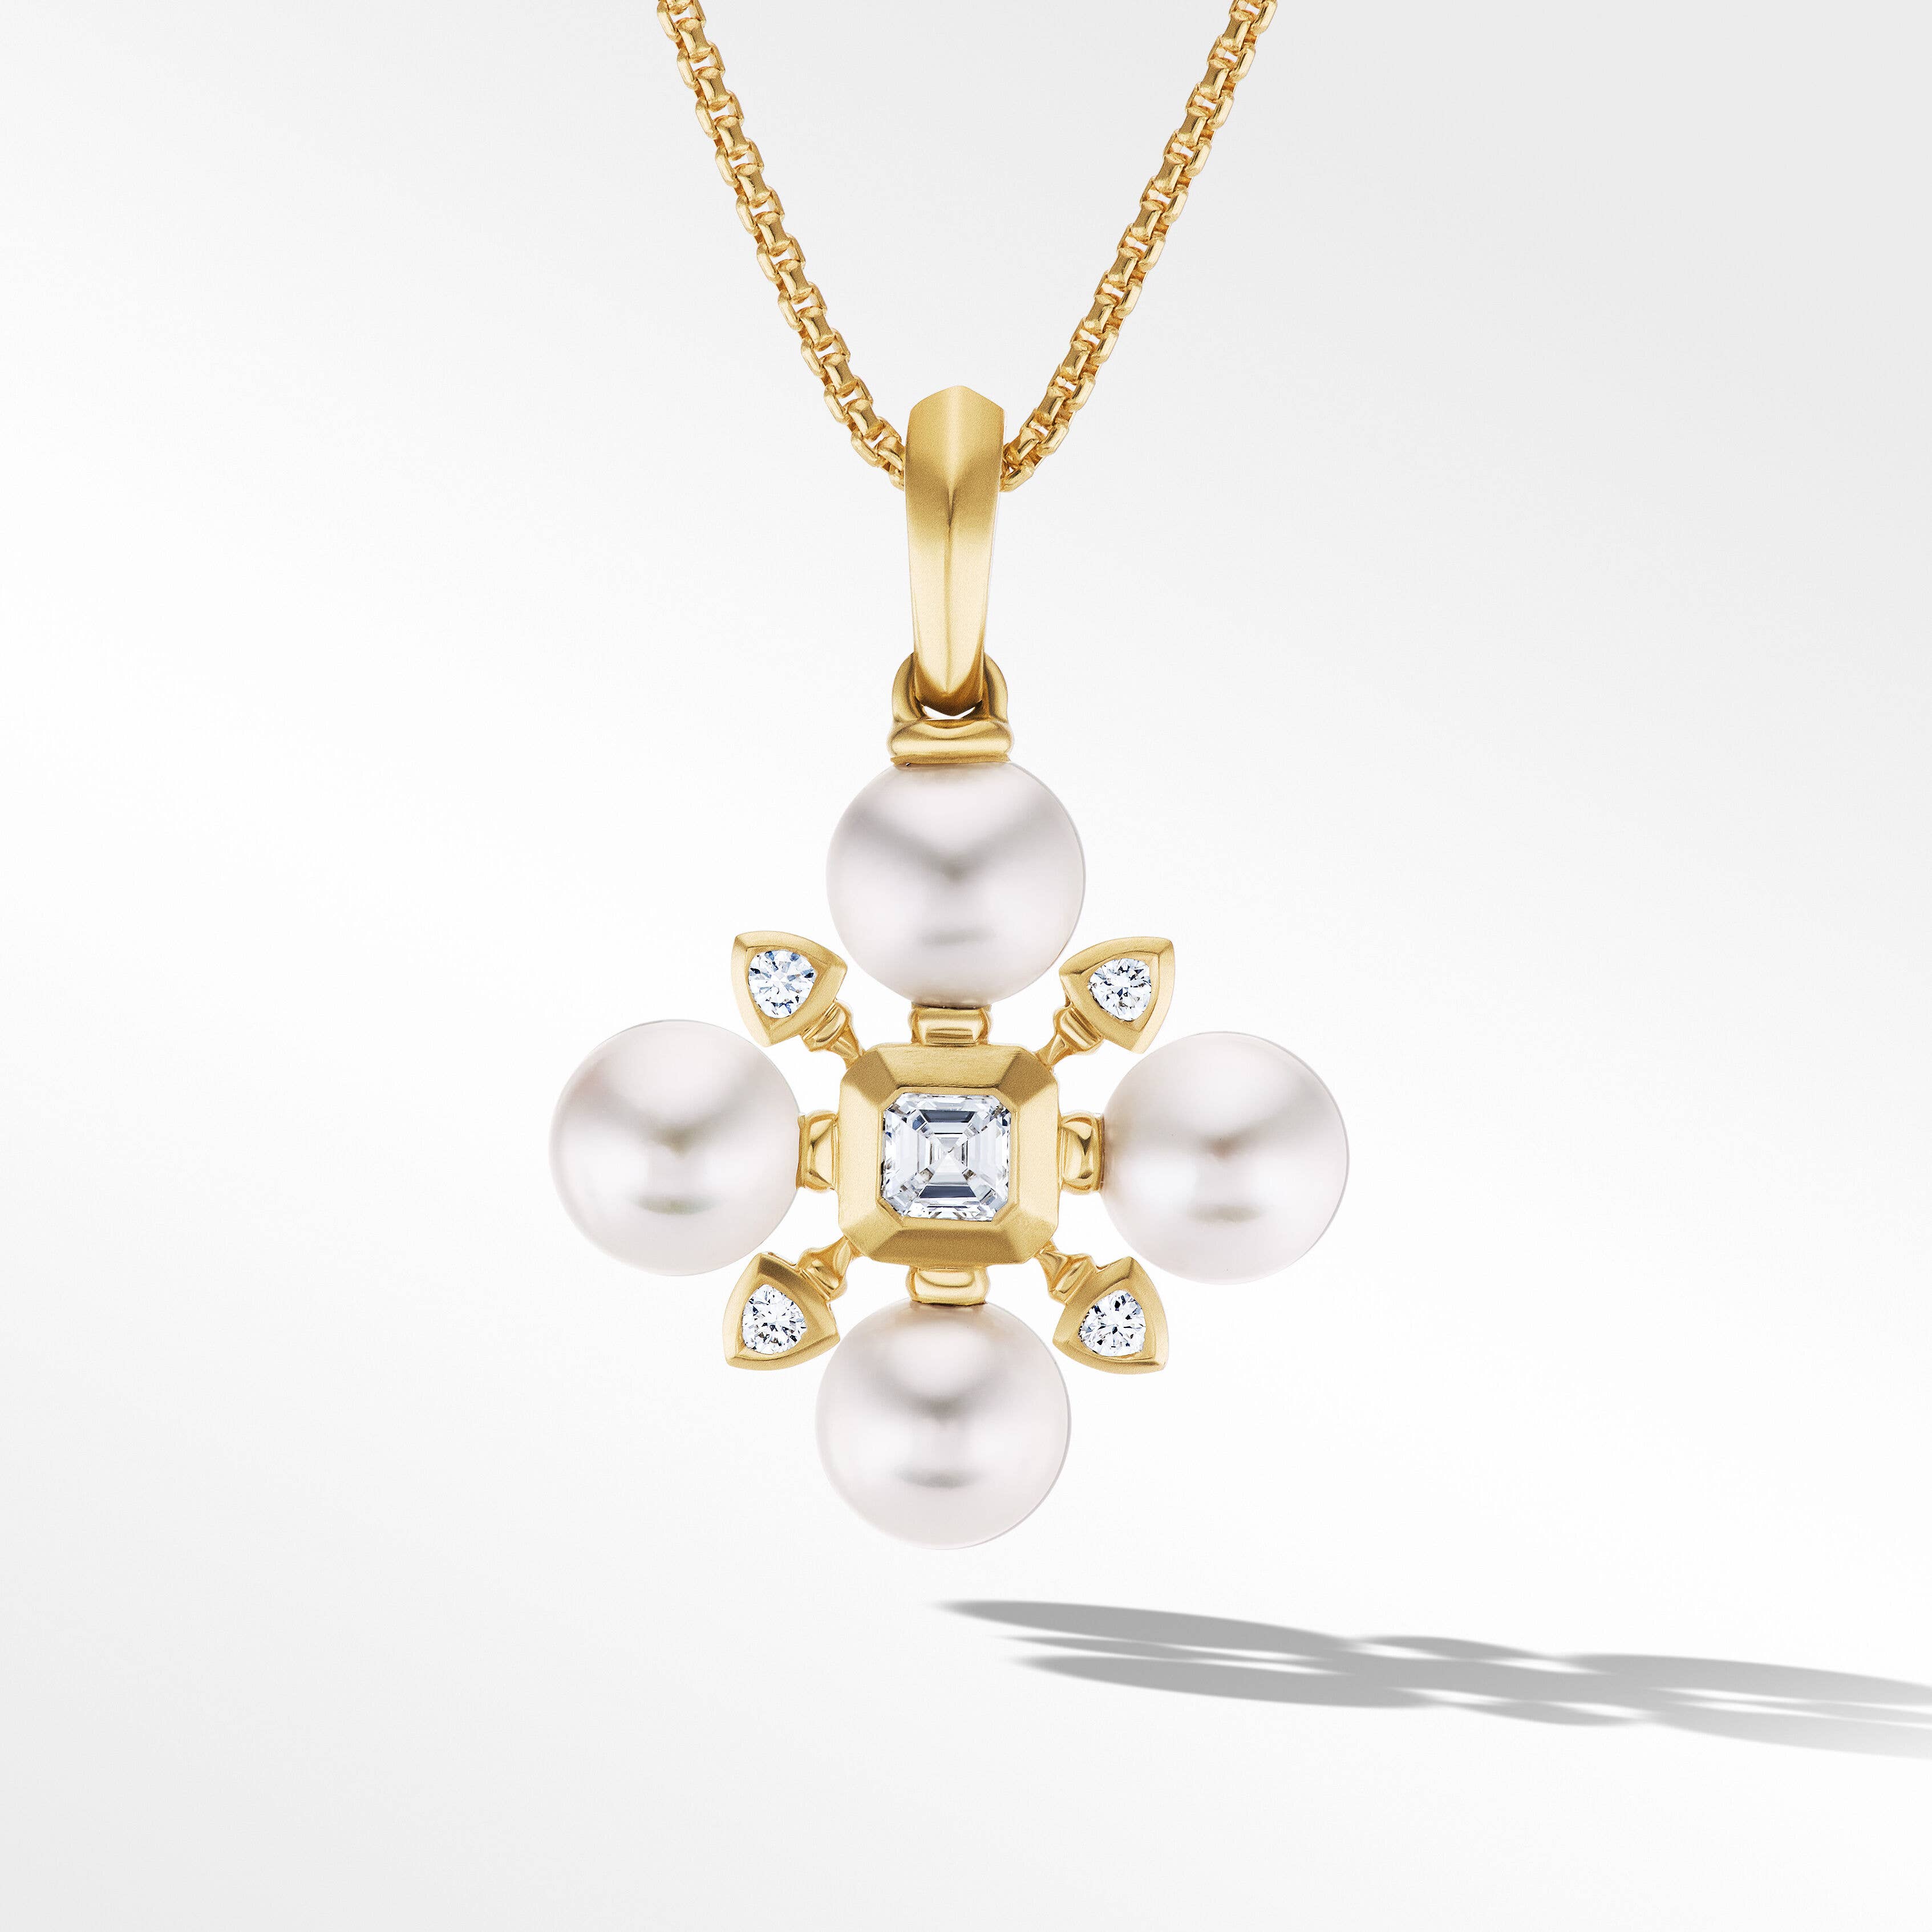 Renaissance Pearl Necklace in 18K Yellow with Diamonds